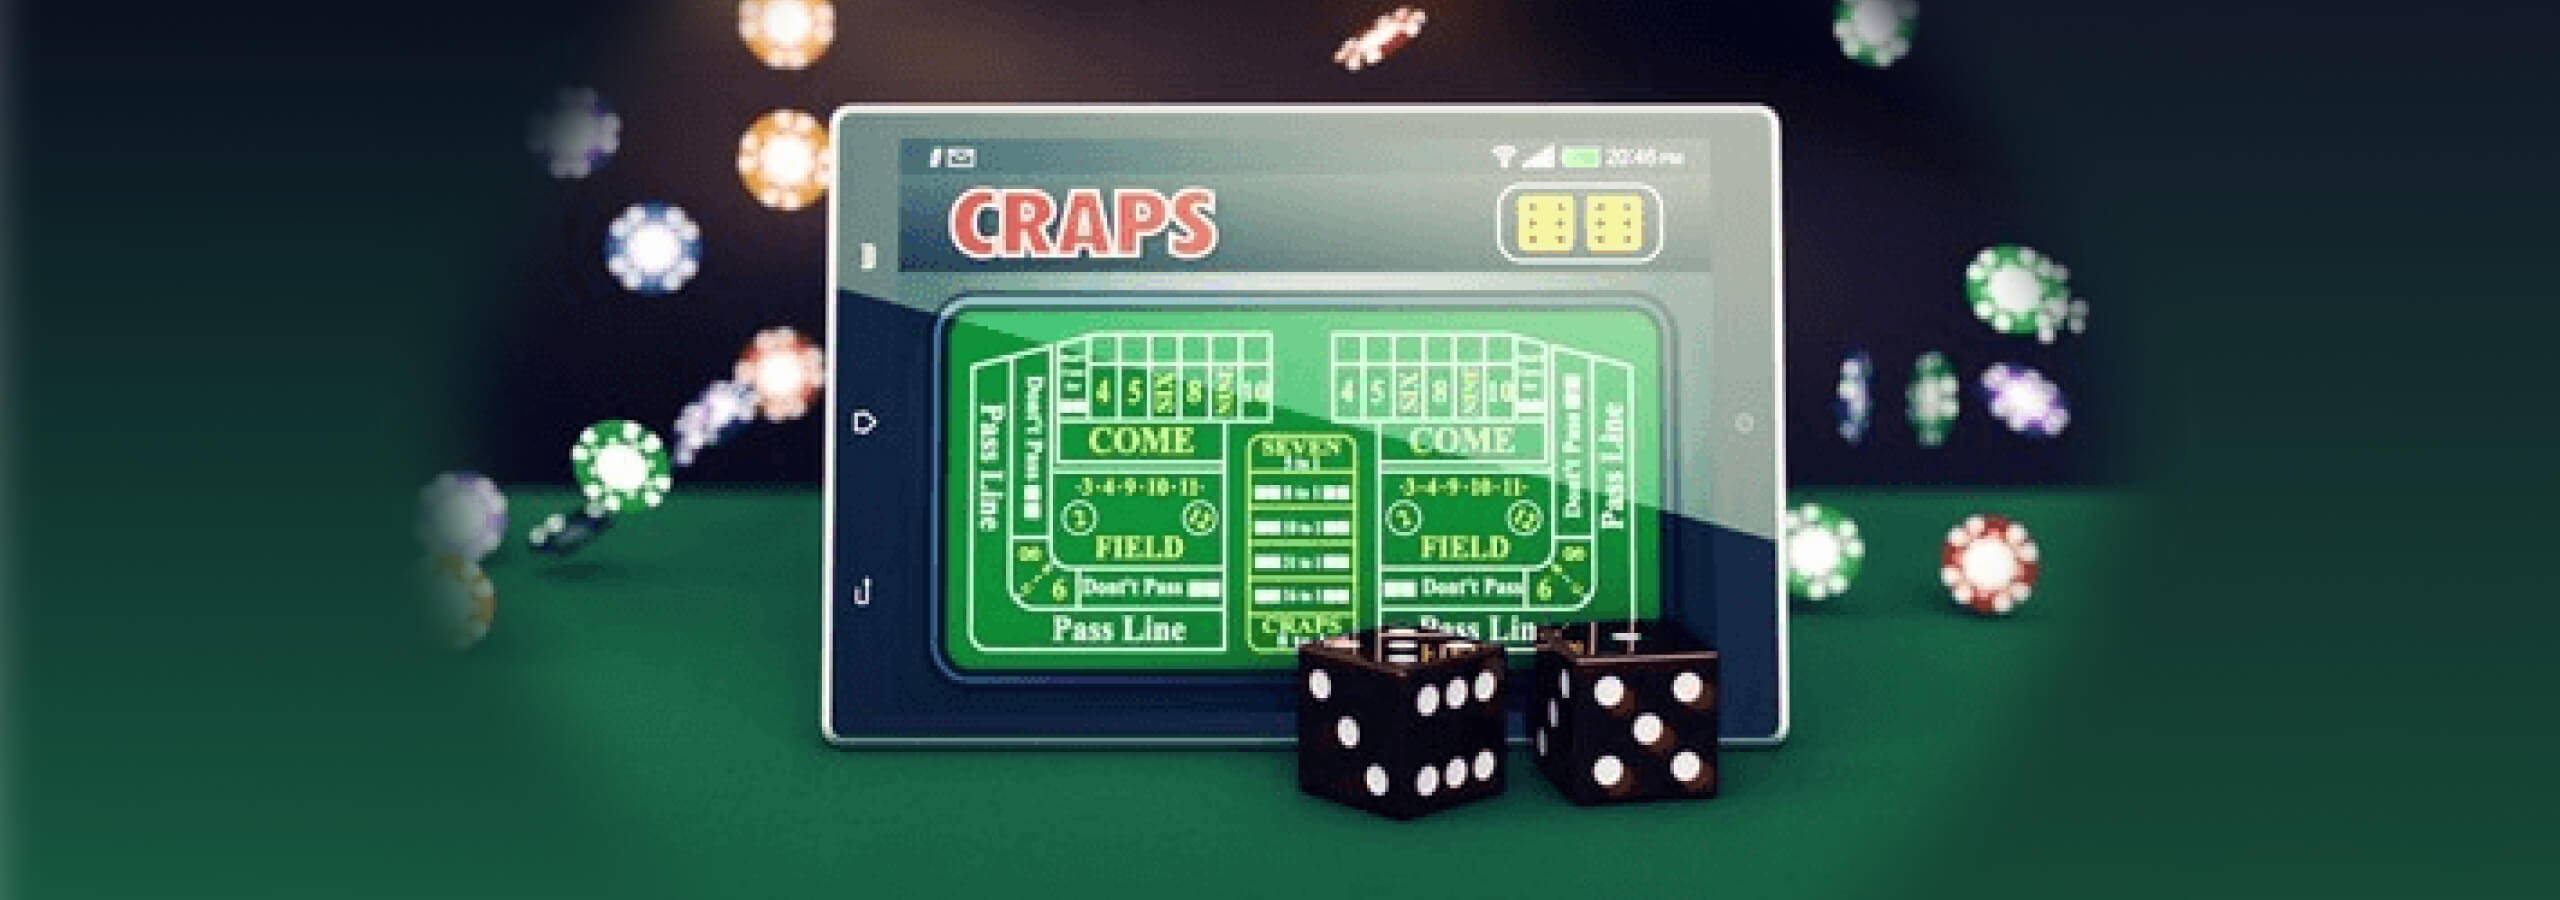 How to Play and Win Online Craps – Full Manual